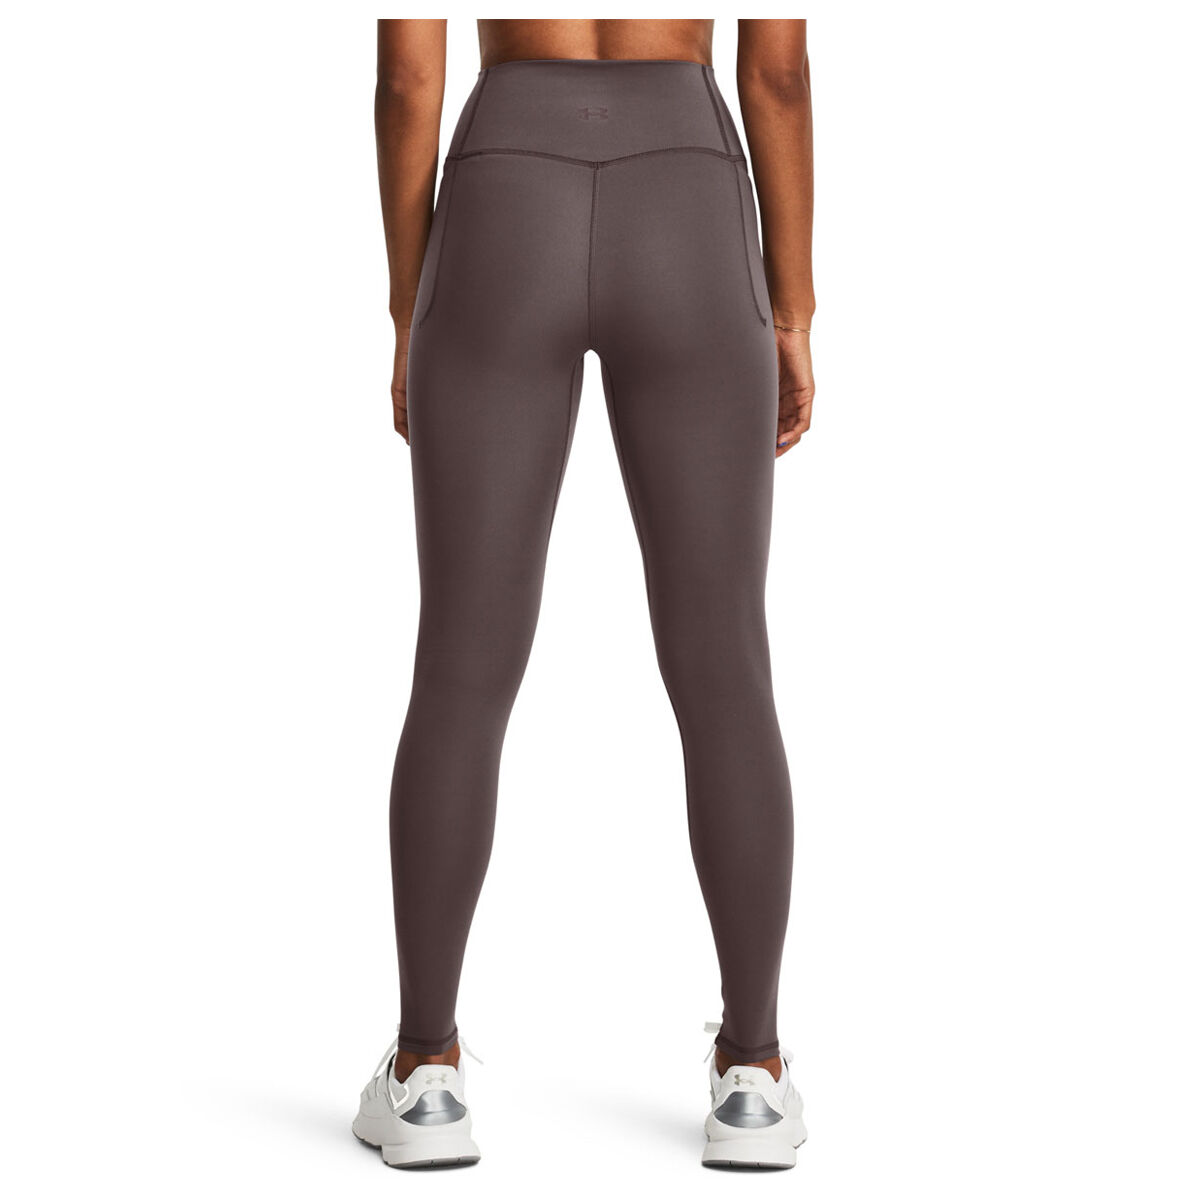 Under Armour Womens Meridian Tights Grey L